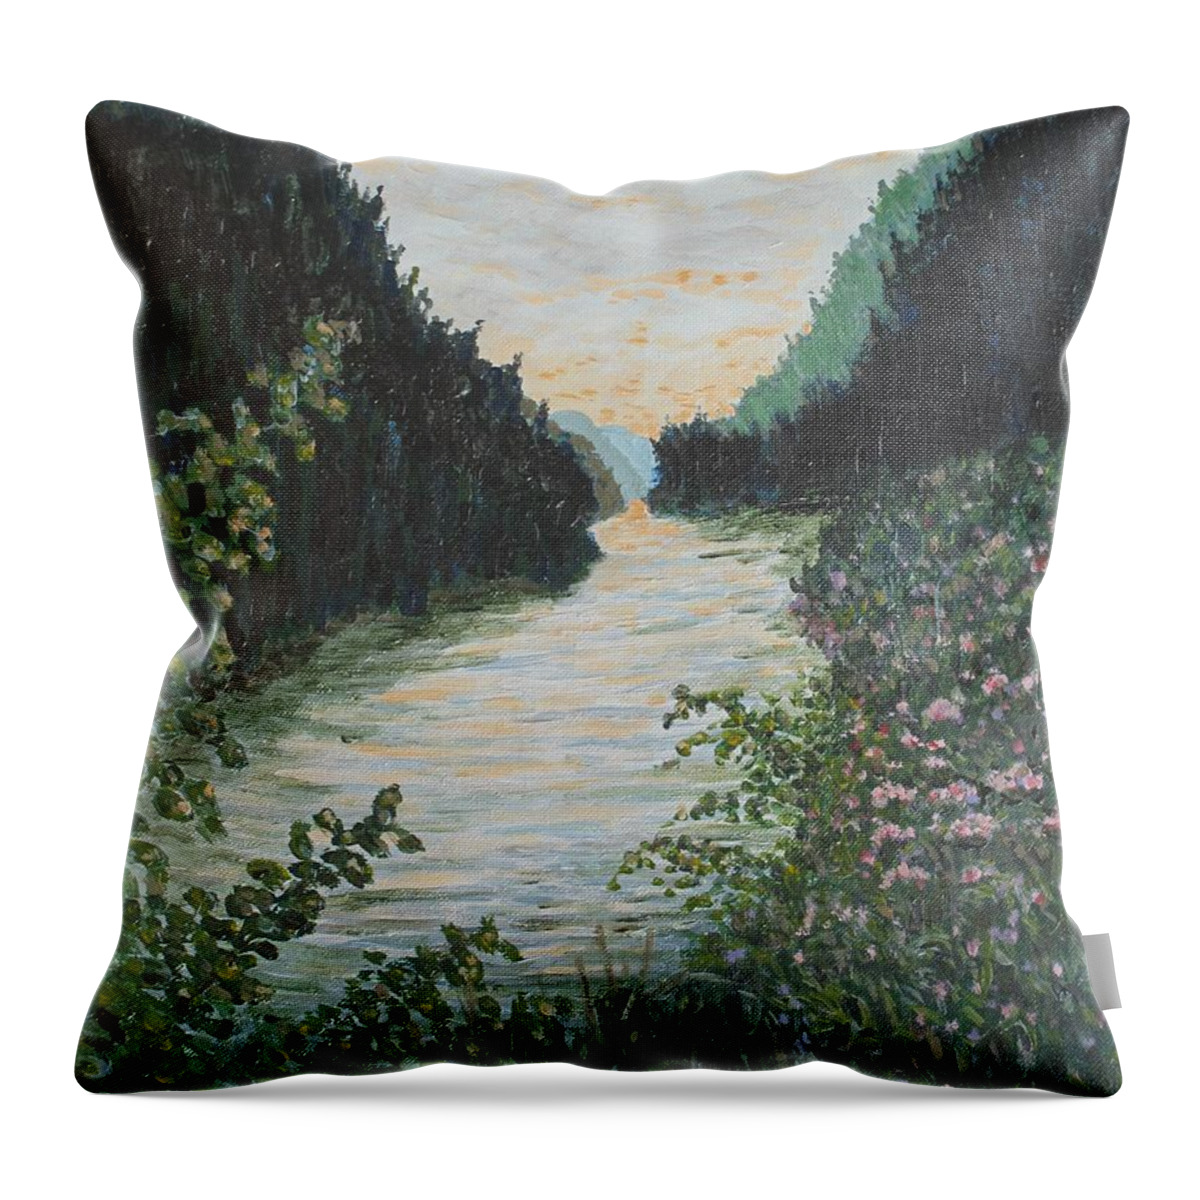 Agawa Canyon Throw Pillow featuring the painting North of Sault Ste. Marie by Ian MacDonald